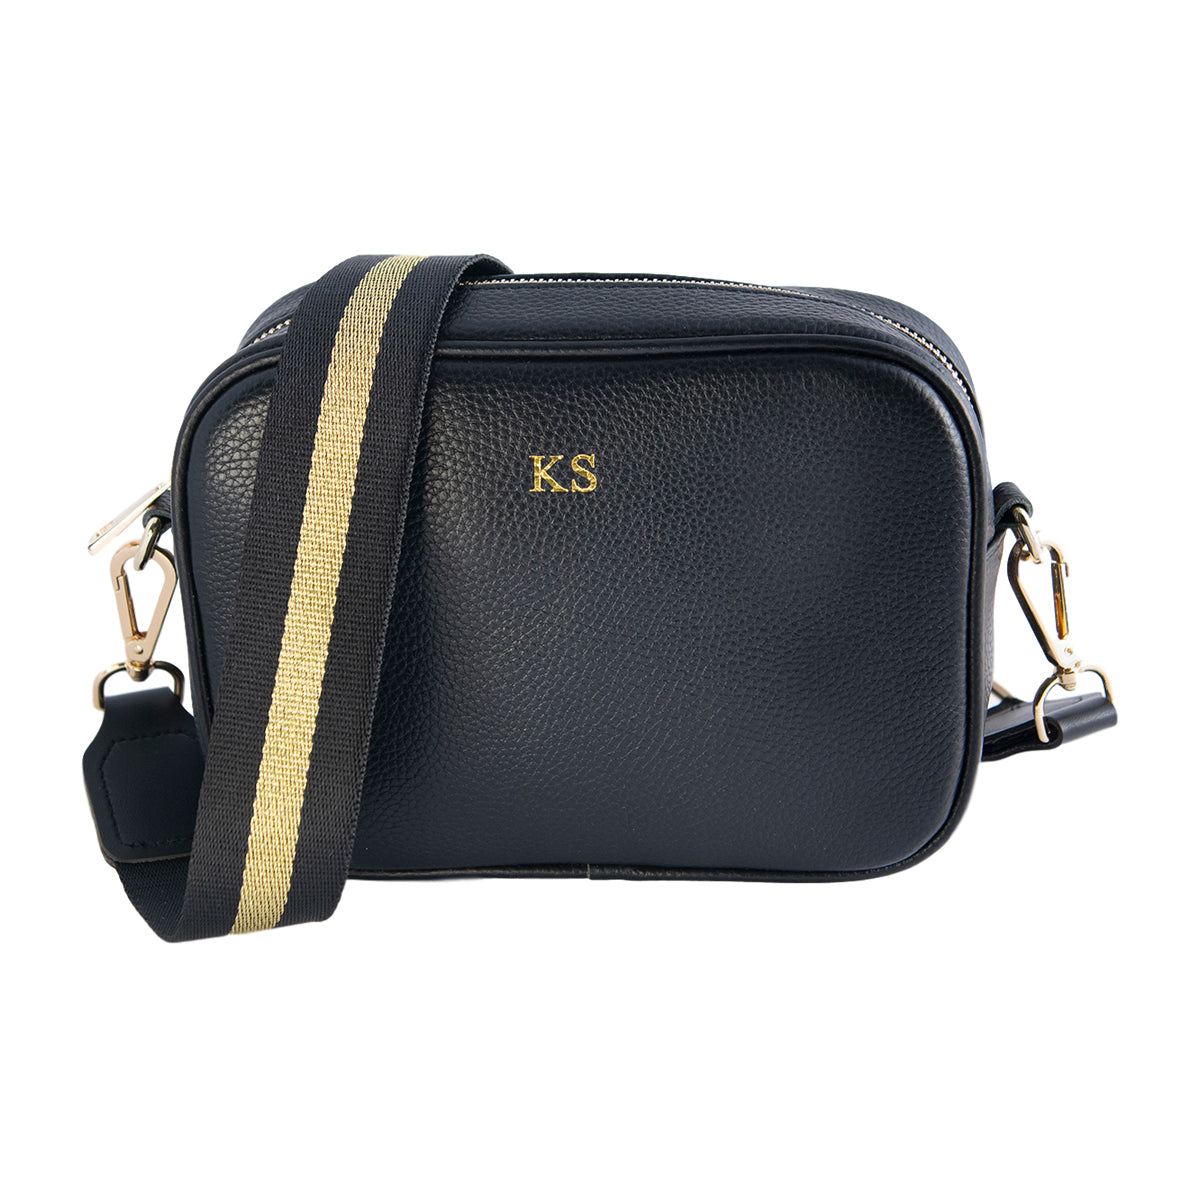 Personalised Black Cross Body Bag with Black & Gold Strap